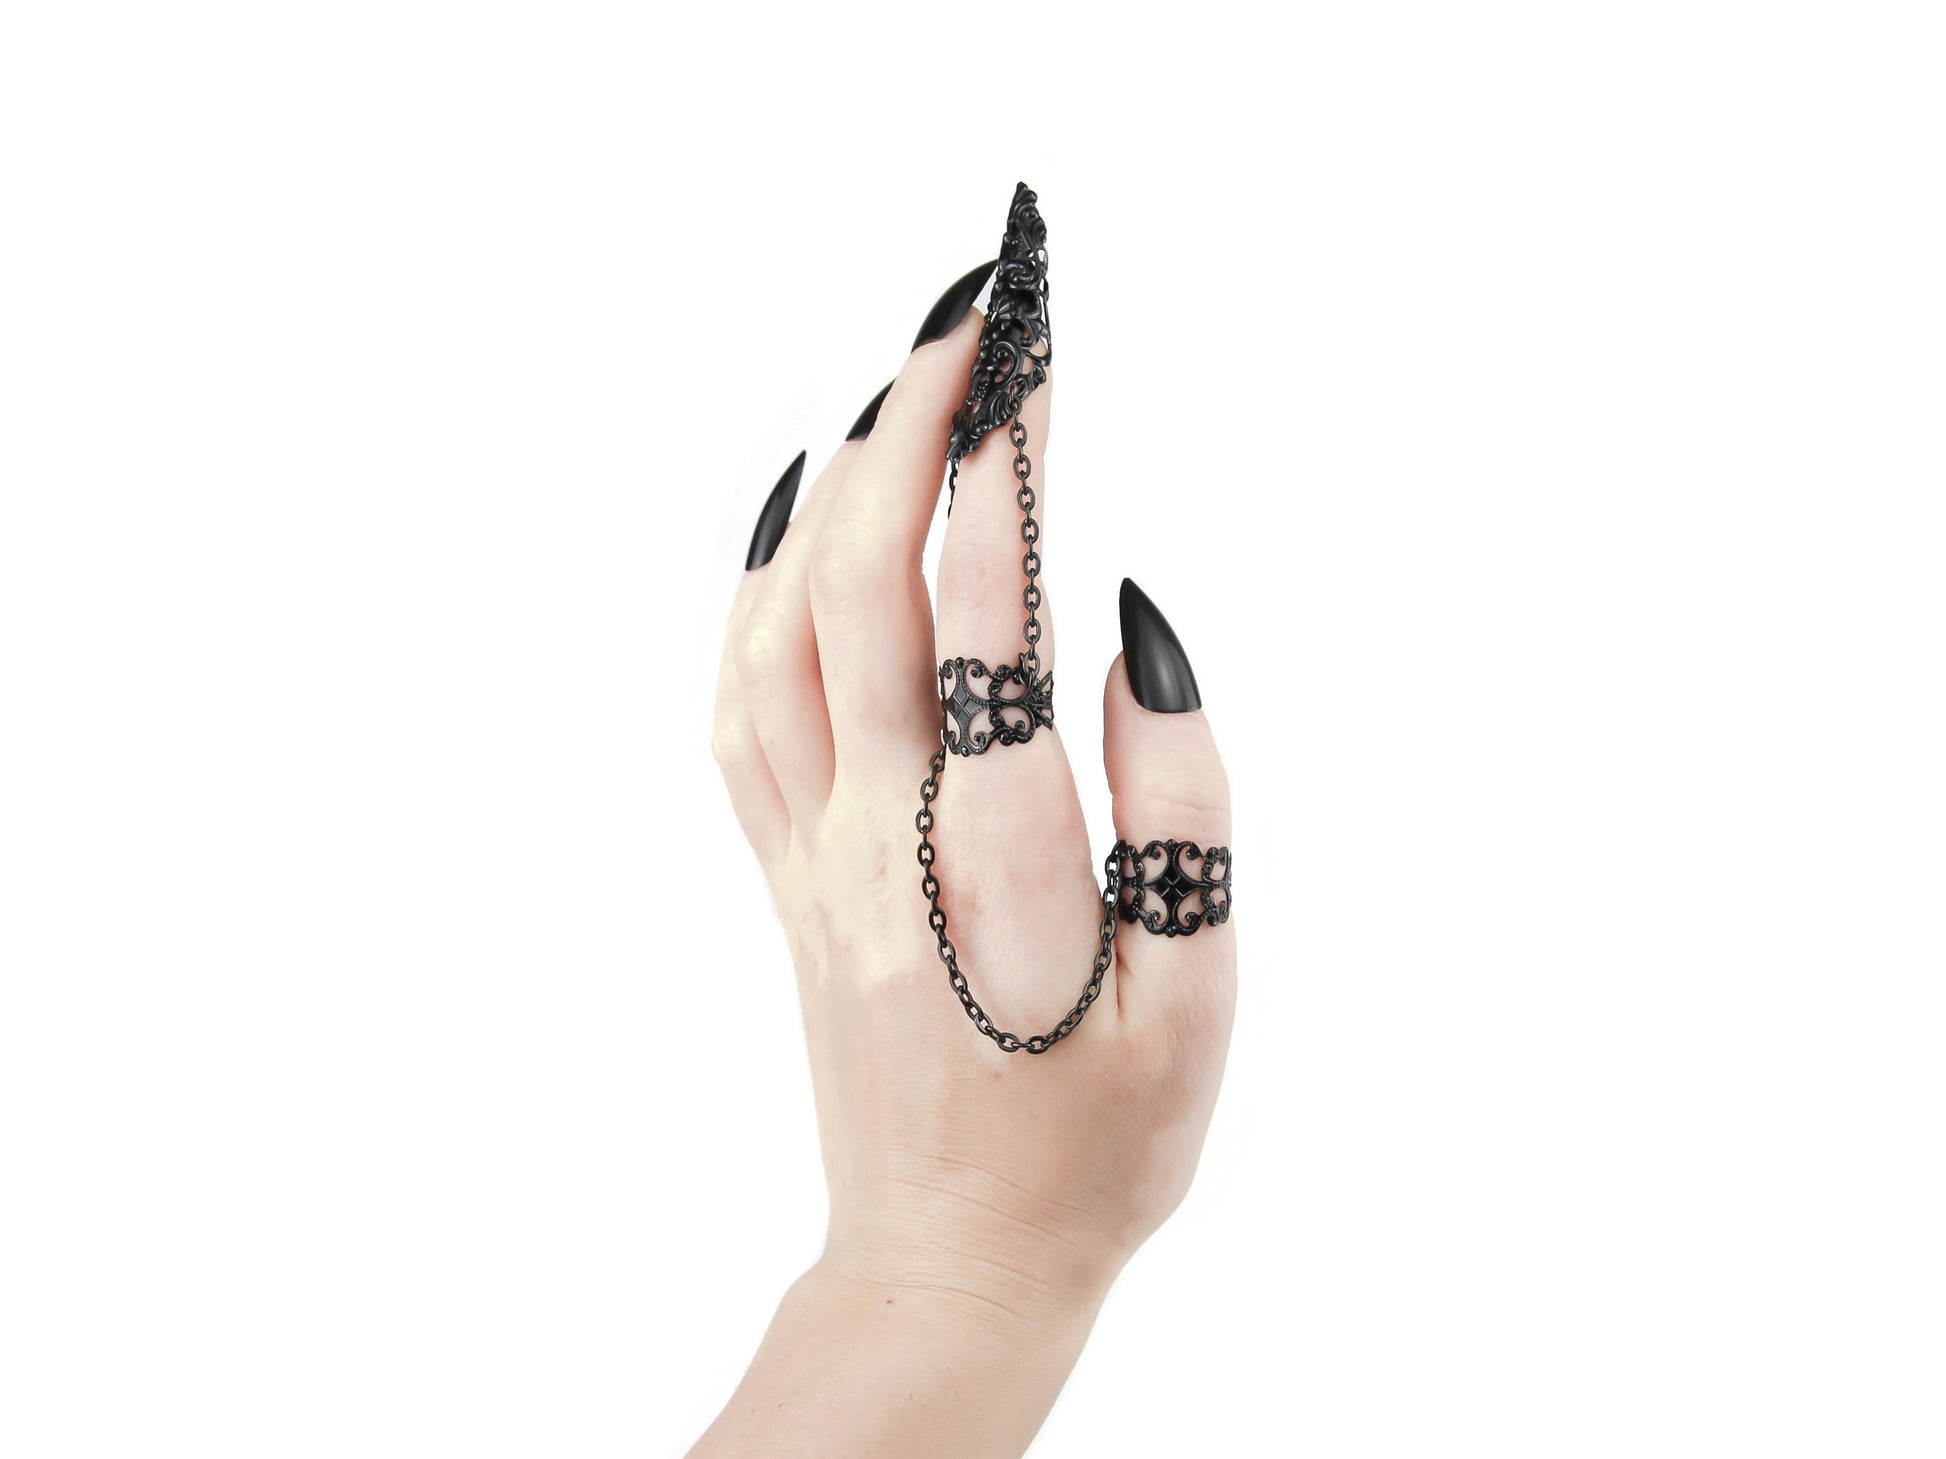 A striking hand showcases a Myril Jewels double ring extending into a dramatic claw over the finger, intricately designed with a black filigree pattern. This bold piece is an emblem of neo-goth style, perfect for those who favor dark-avantgarde jewelry. Ideal for Halloween, it complements a punk look, and adds an edge to minimal goth, everyday wear, or as a conversation piece at rave parties and festivals